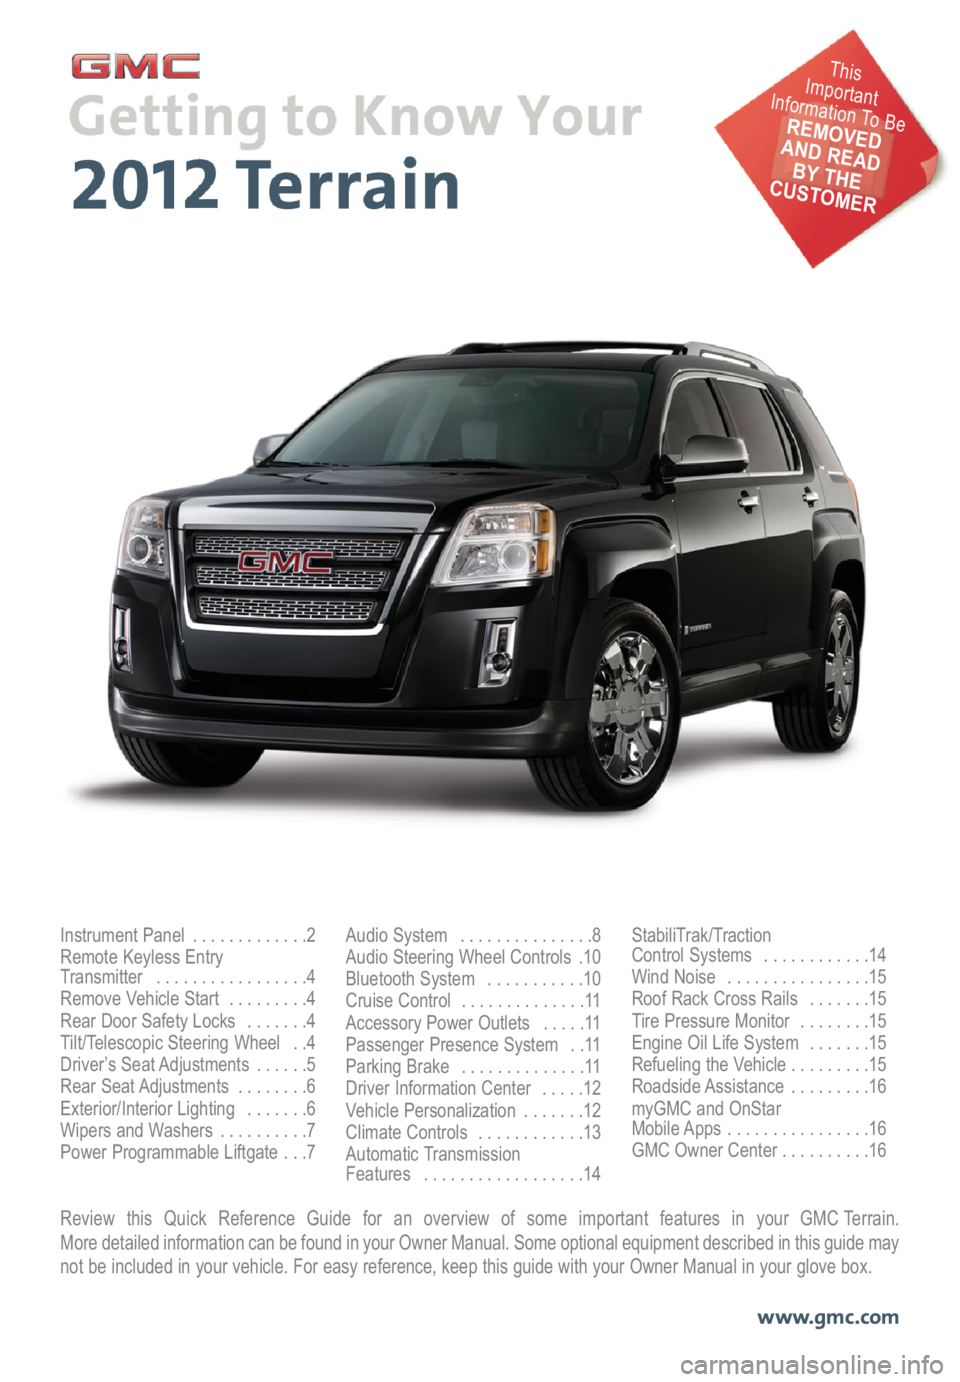 GMC TERRAIN 2012  Get To Know Guide Review this Quick Reference Guide for an overview of some important features in your GMC Terrain. 
More detailed information can be found in your Owner Manual. Some optional equipment described in thi